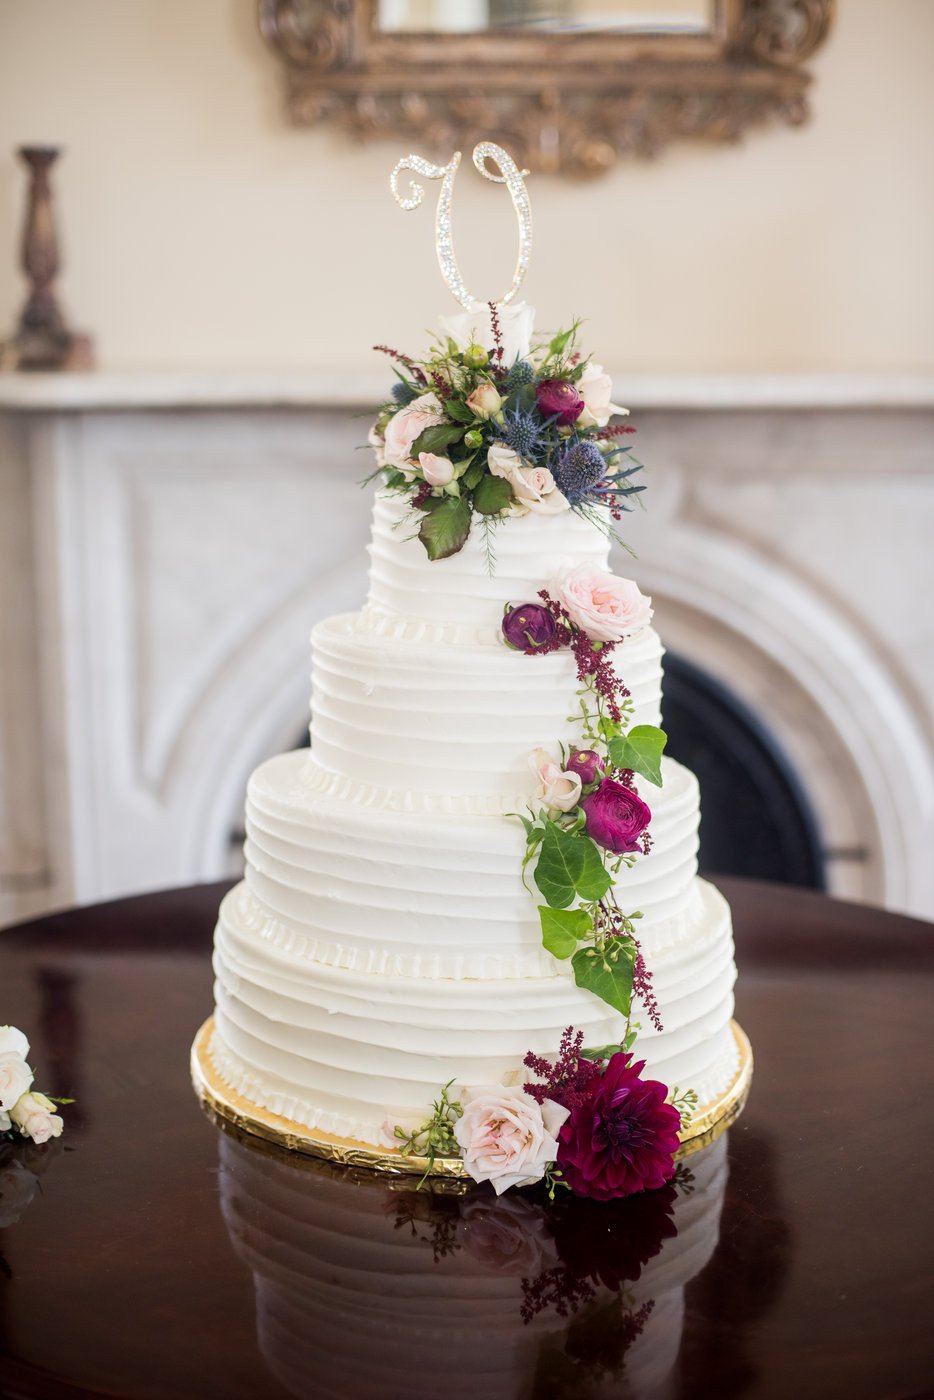 Top 5 Wedding Cake Bakeries in New Orleans